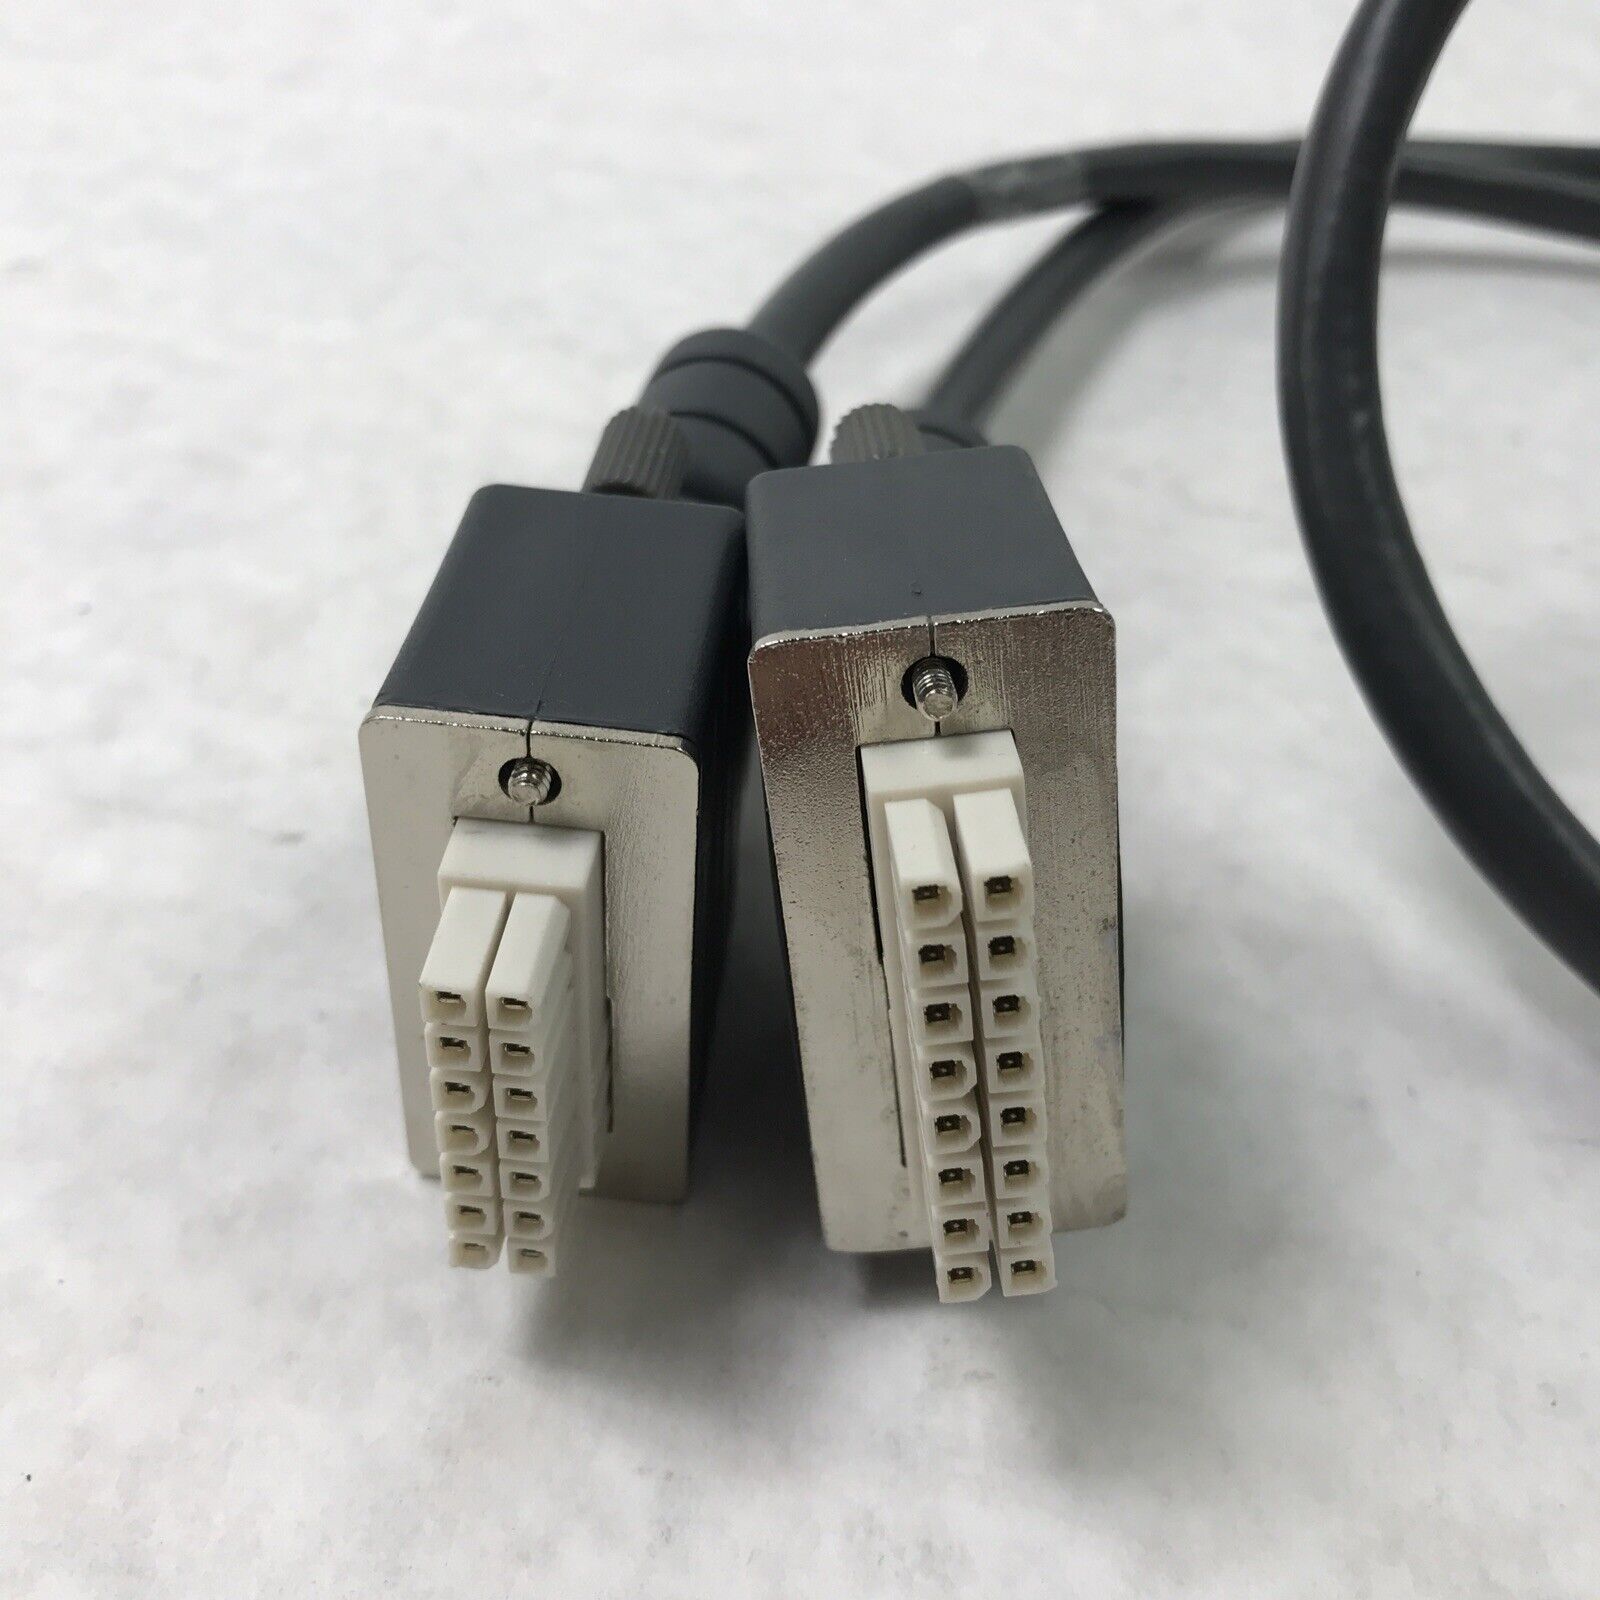 (Lot of 2) Foxconn 72-3780-010 Power Cable